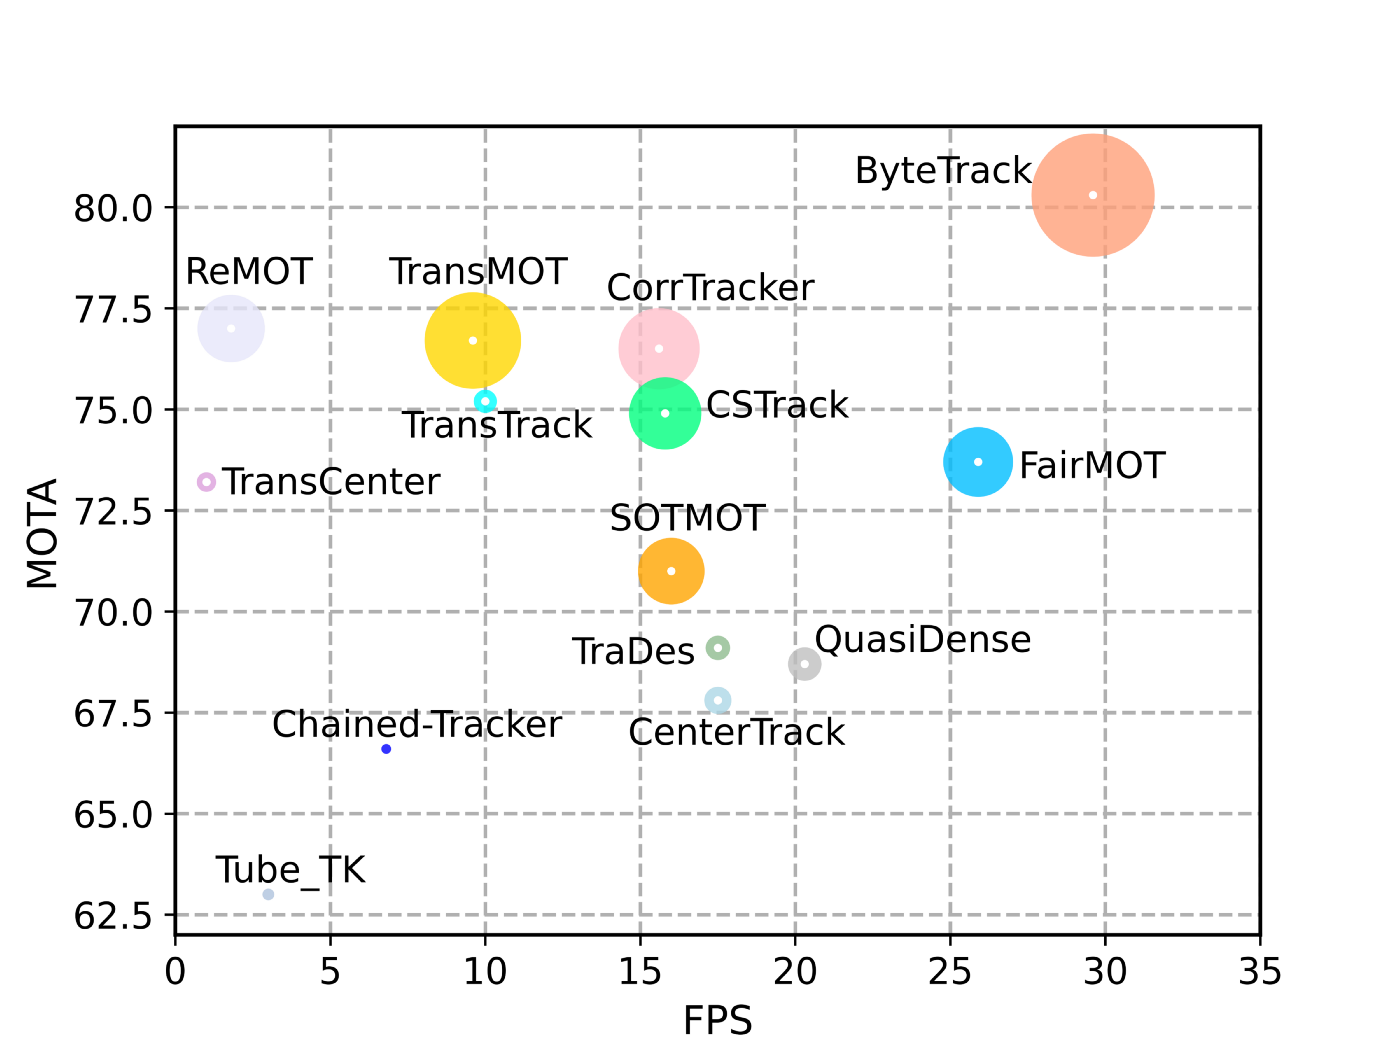 ByteTrack comparison with other algos